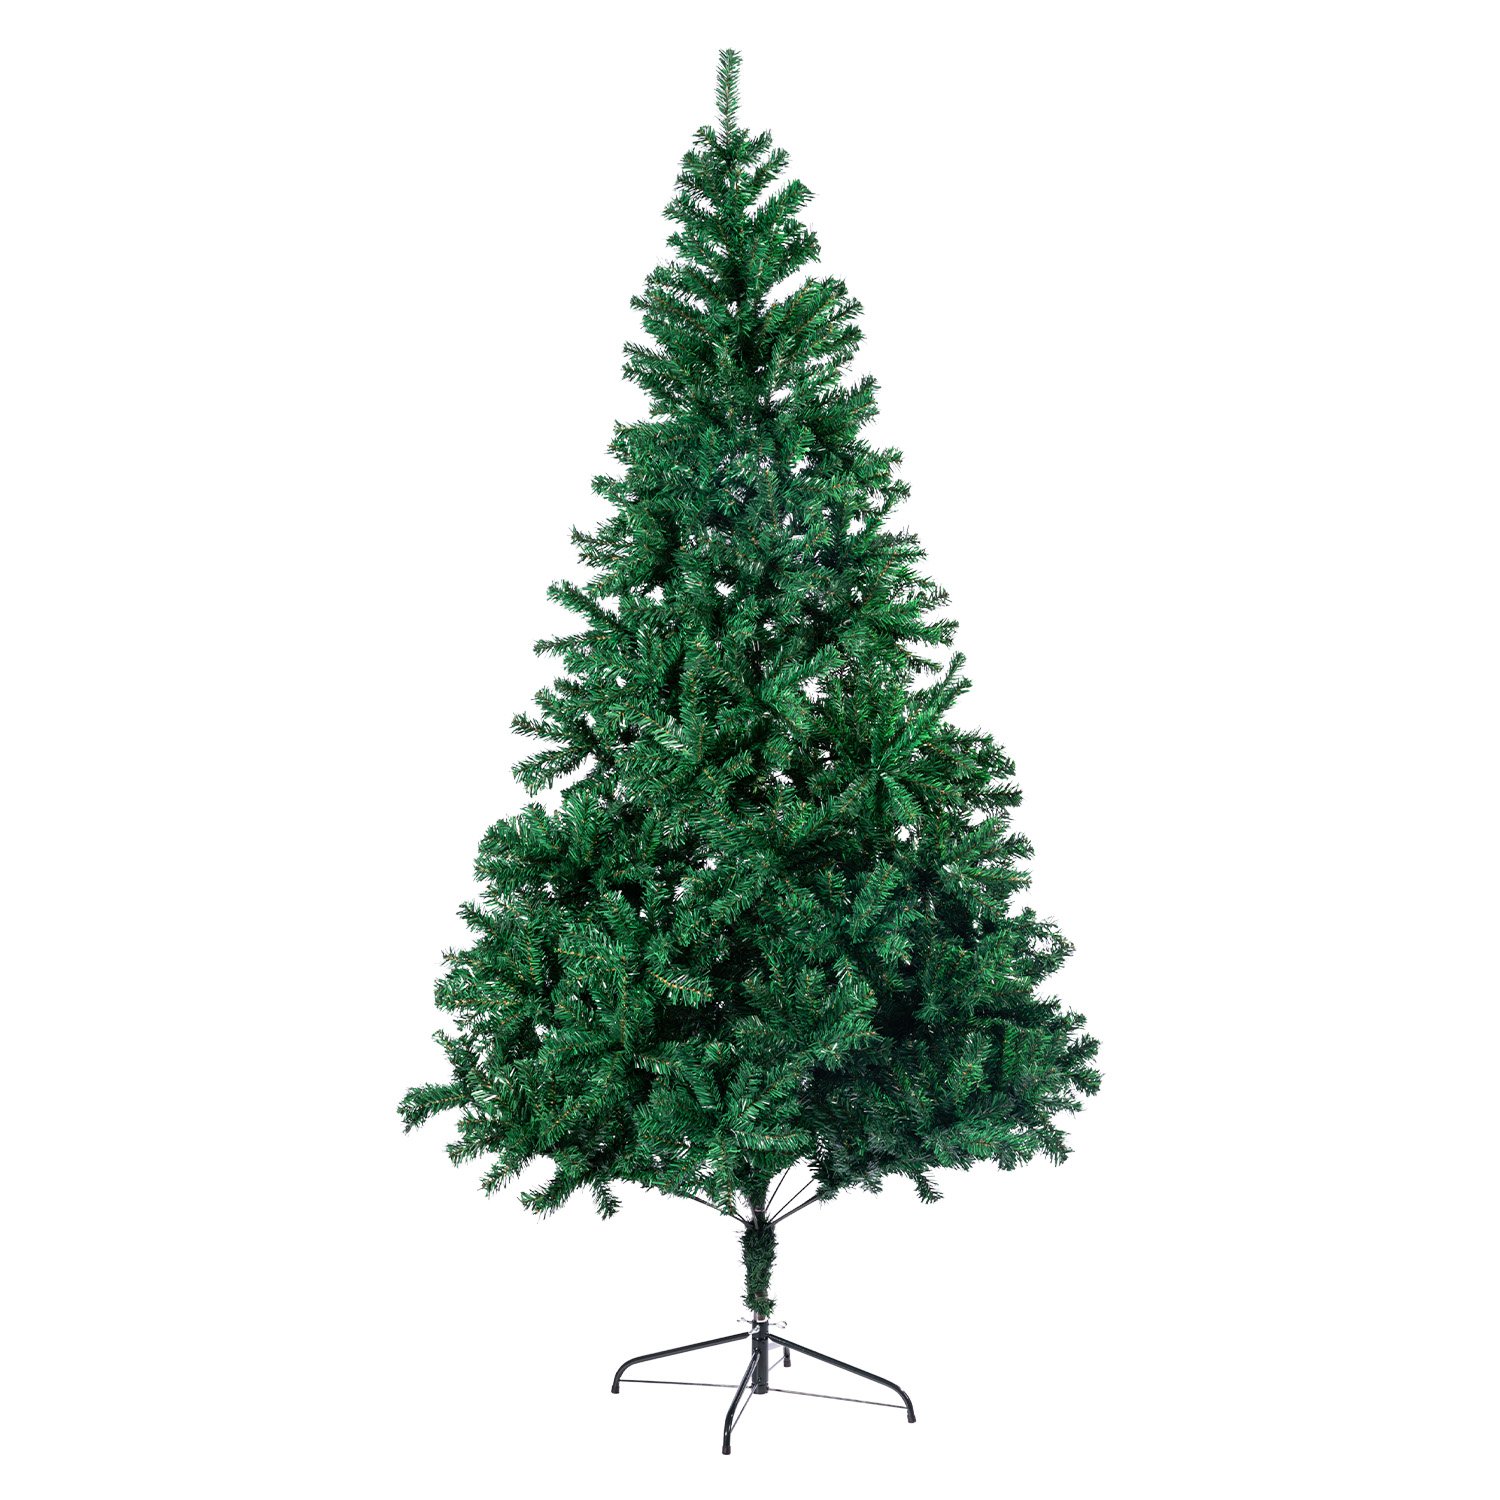 Christabelle Green Artificial Christmas Tree 2.1m - 1200 Tips 2